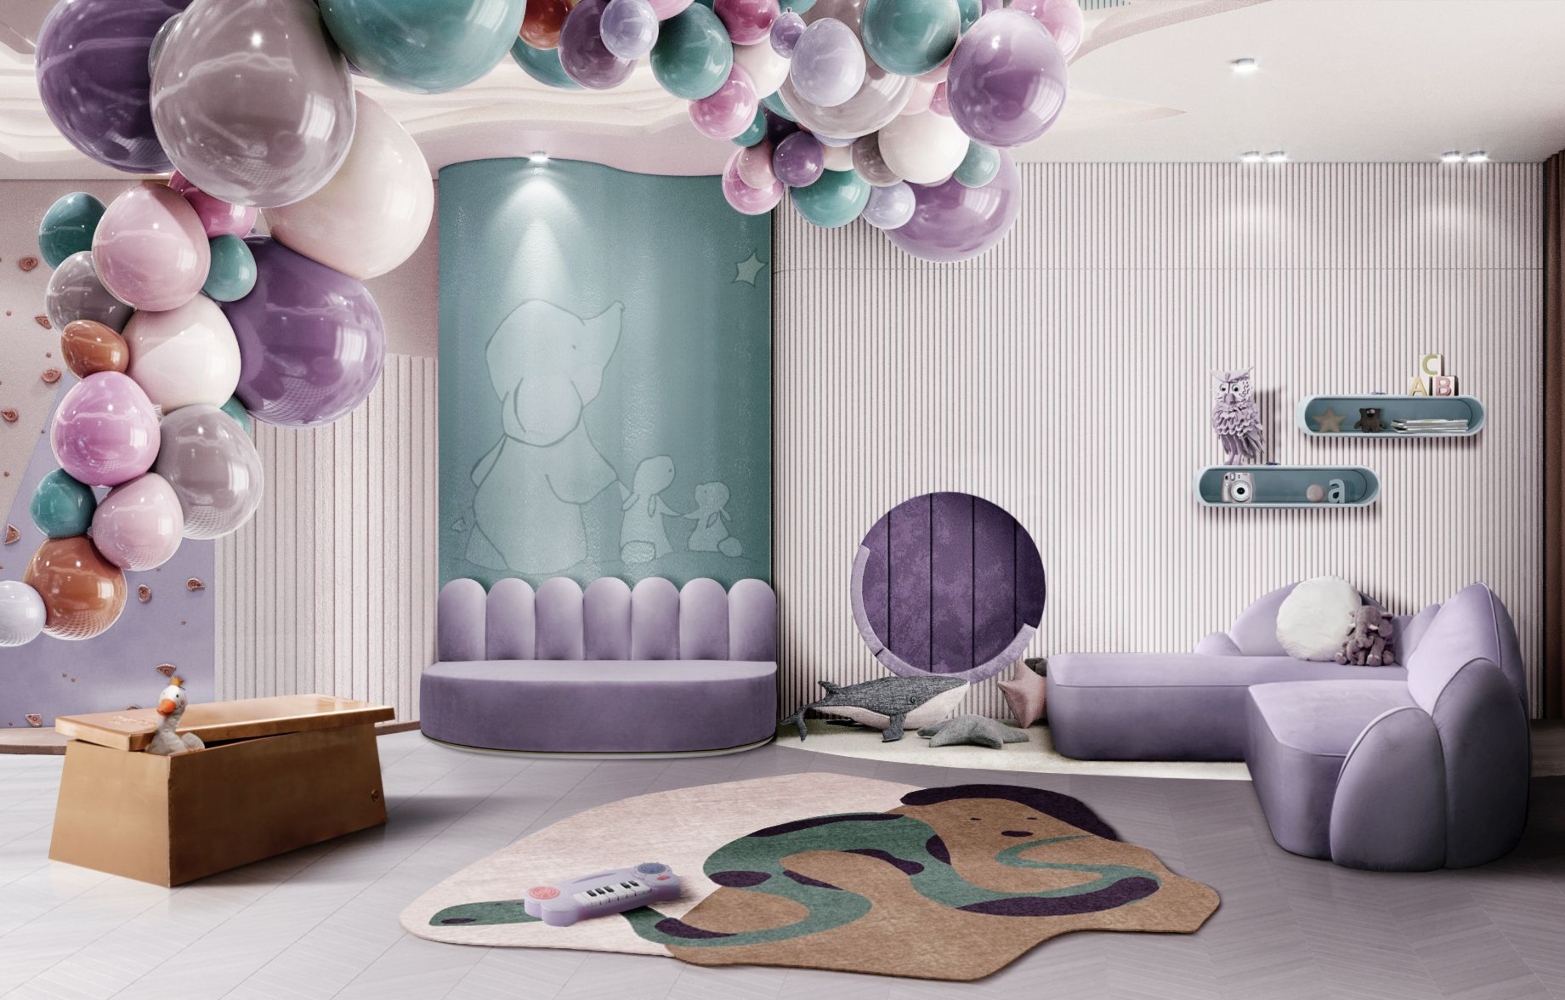 AN UPLIFTING KIDS LOUNGE FOR THE LITTLE ONES